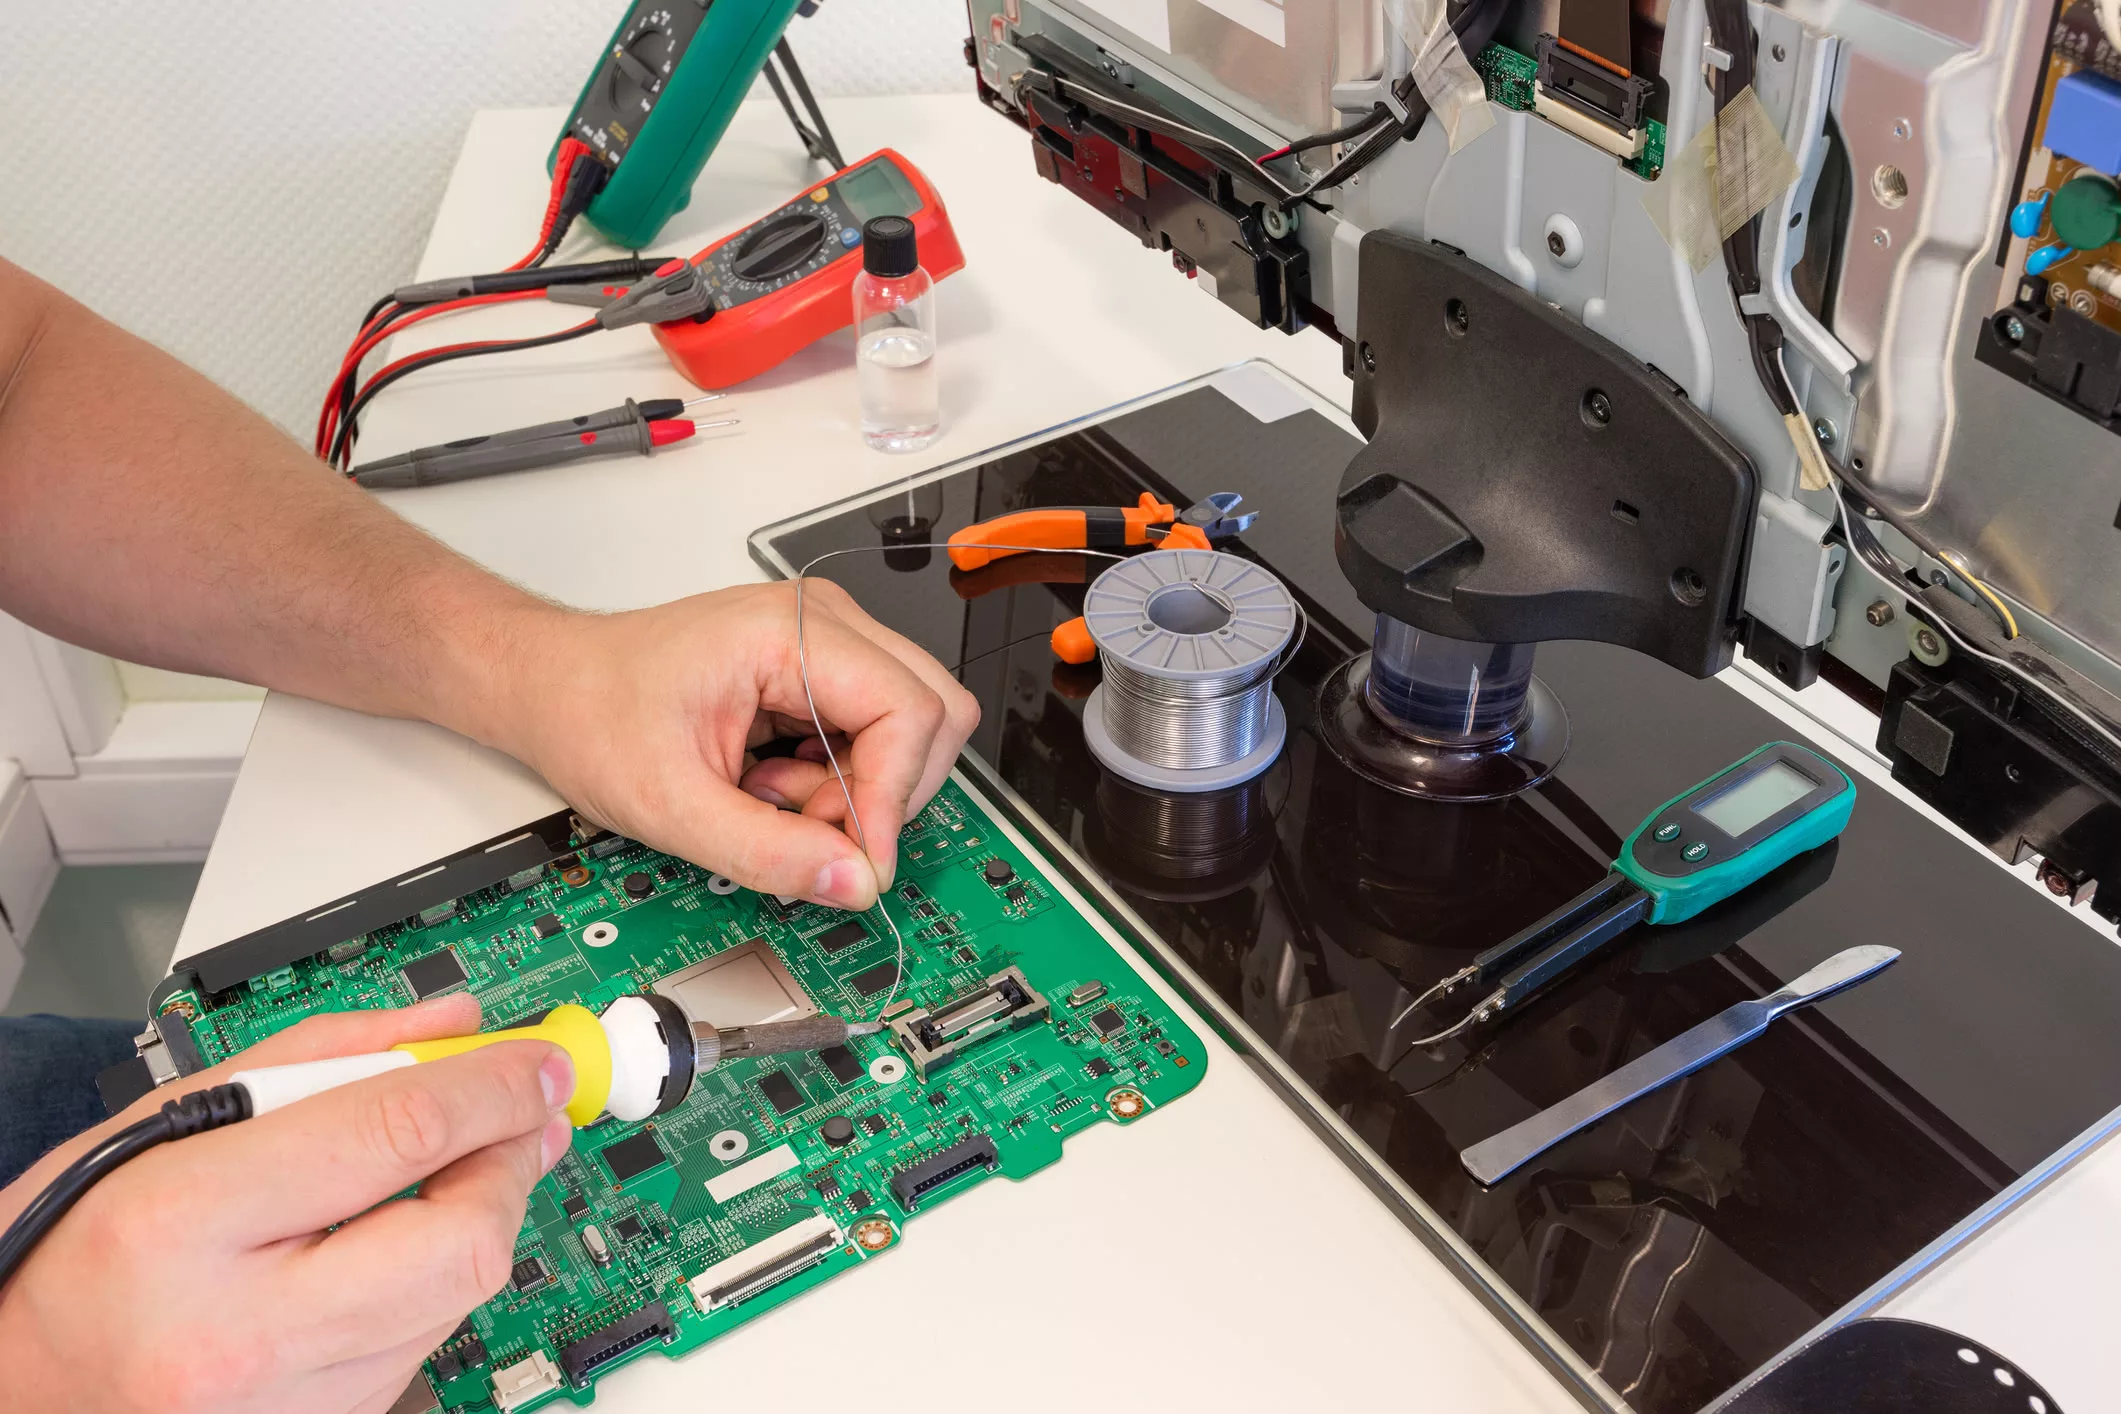 Learn to hand solder electronic components using lead free solders in accordance with IPC a-610 Guidelines.